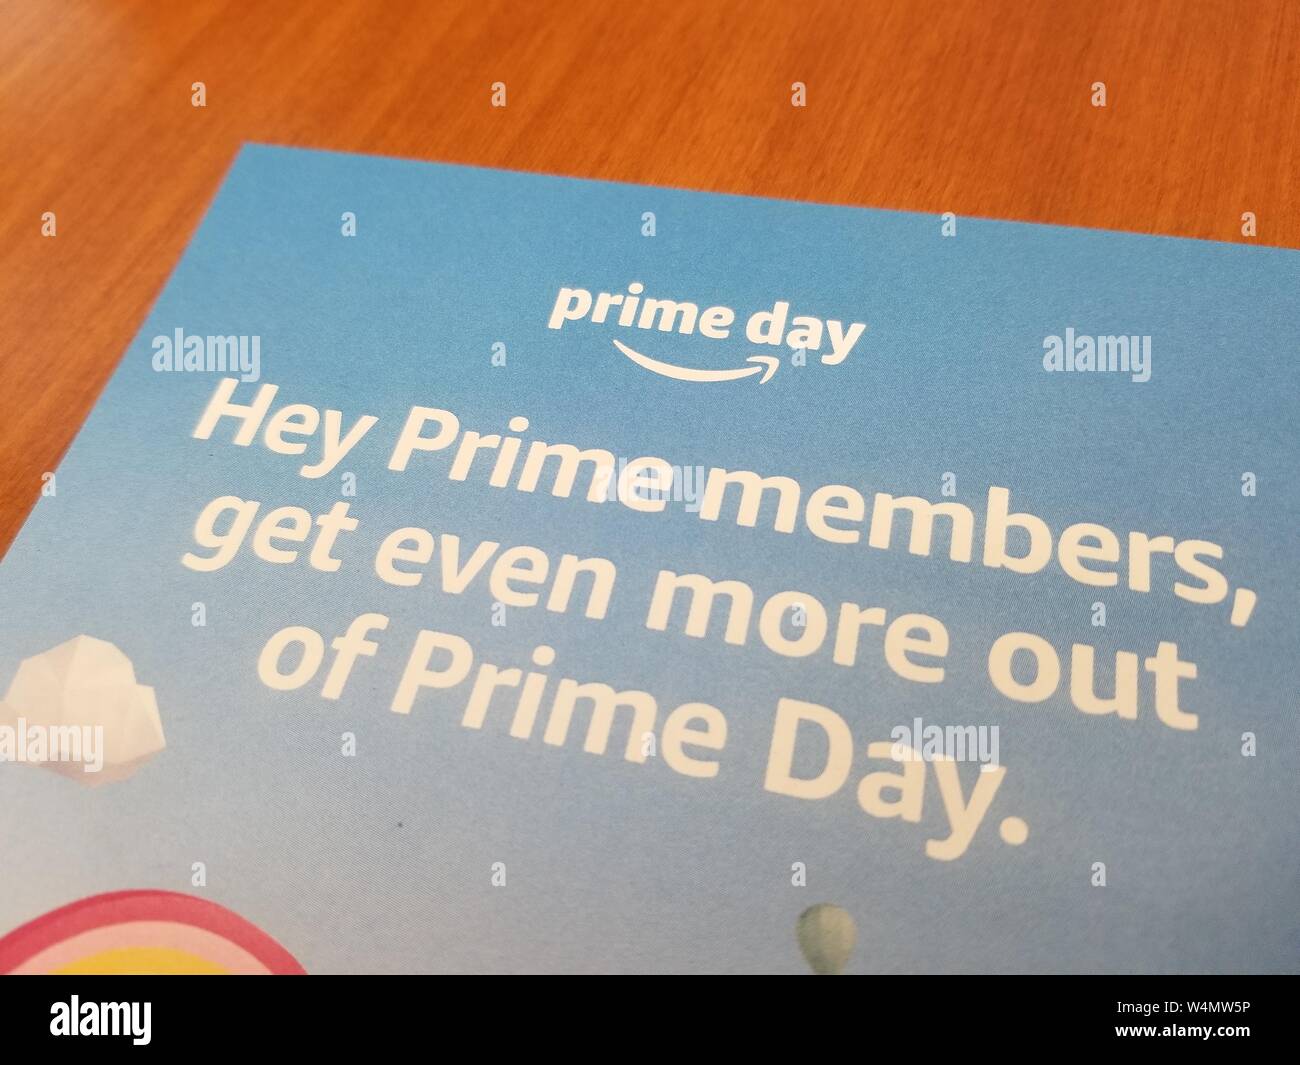 https://c8.alamy.com/comp/W4MW5P/close-up-of-logo-for-amazon-prime-day-sale-on-flyer-announcing-sale-on-light-wooden-surface-july-12-2019-W4MW5P.jpg